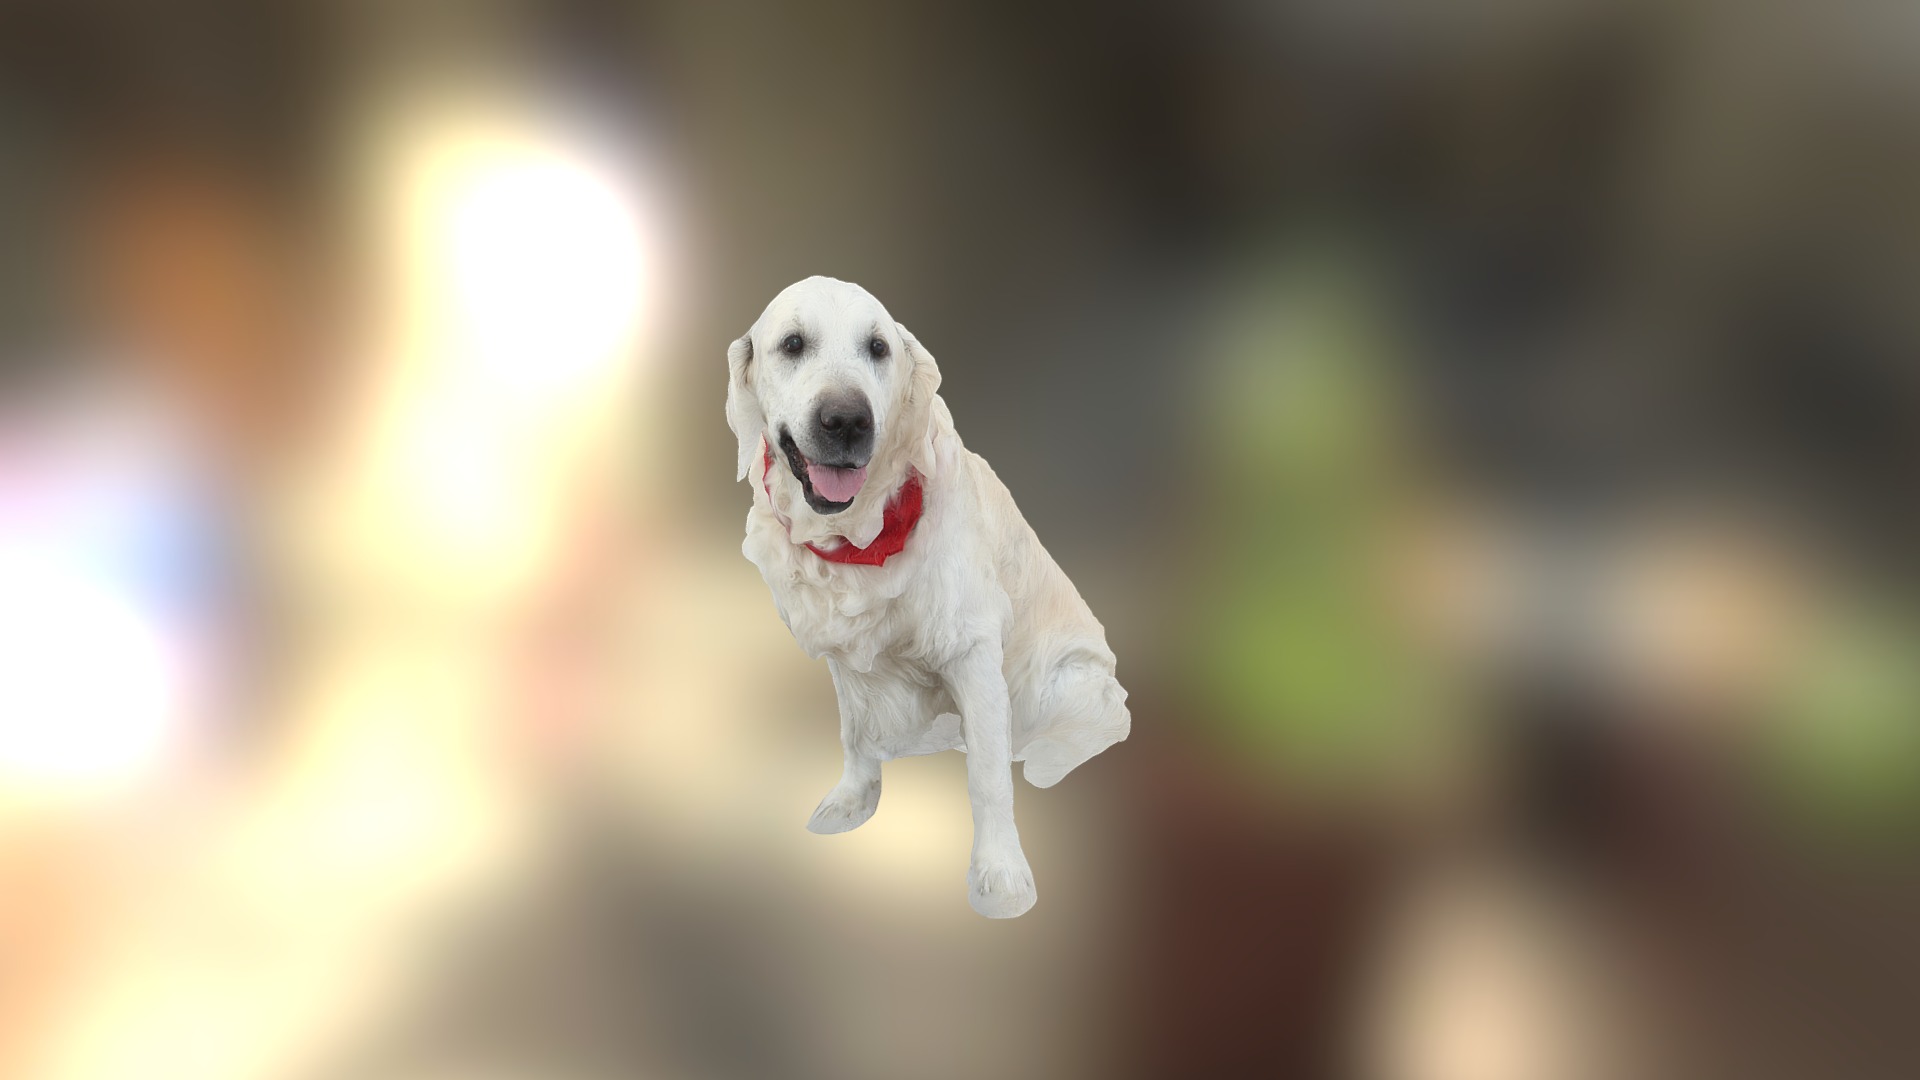 3D model Puppy - This is a 3D model of the Puppy. The 3D model is about a dog running in the air.